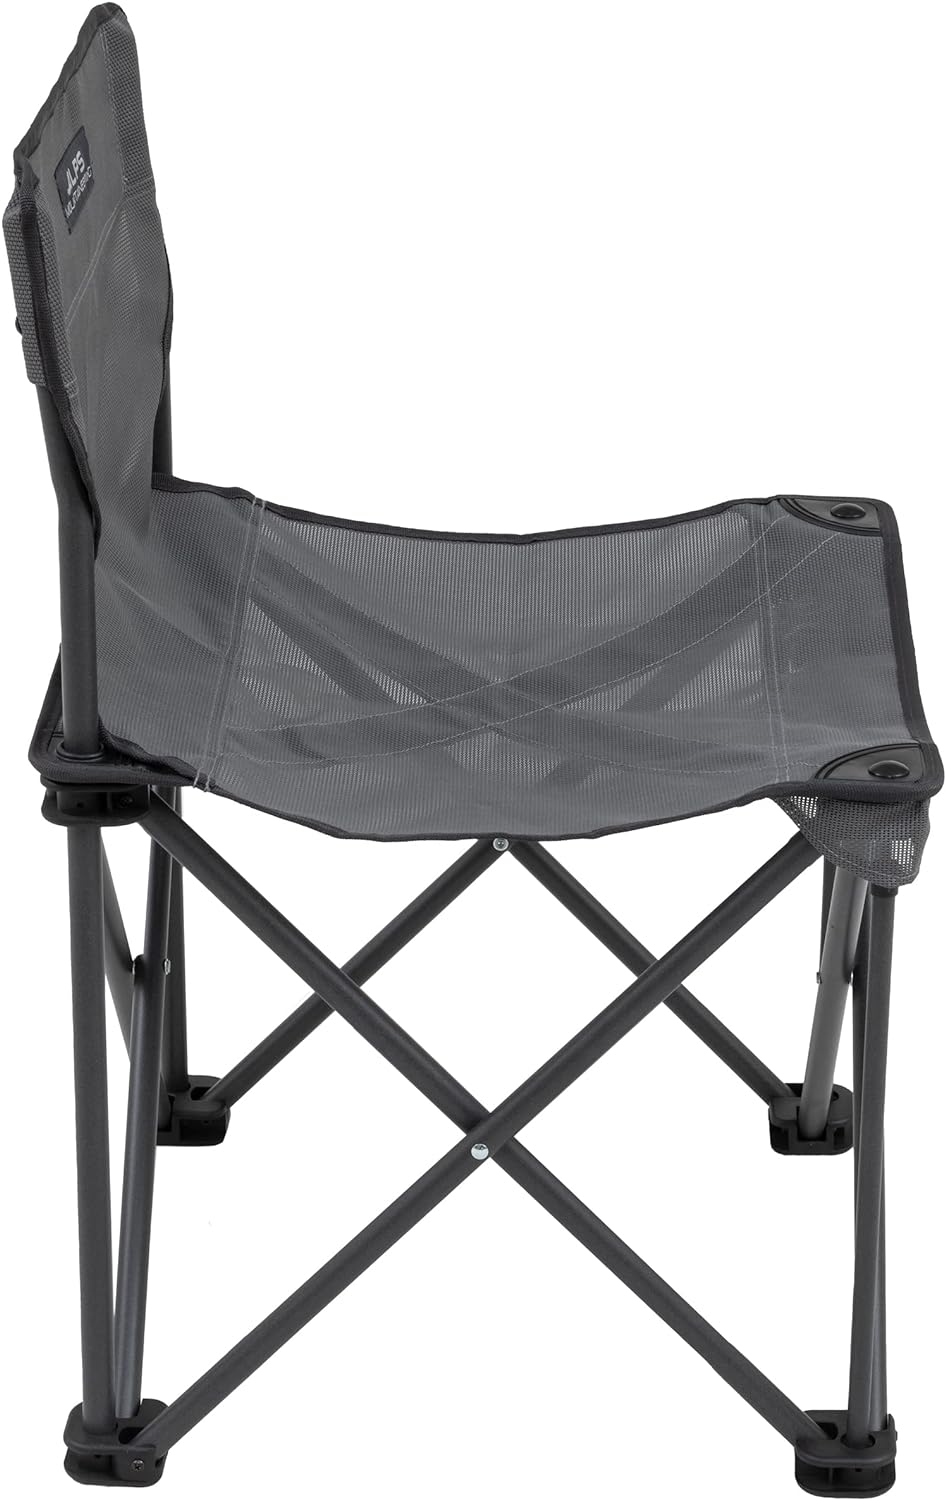 ALPS Mountaineering Adventure Folding Camping Chairs - Durable Mesh Fabric Over Powder Coated Aluminum with Simple Compact Design and Shoulder Carry Bag